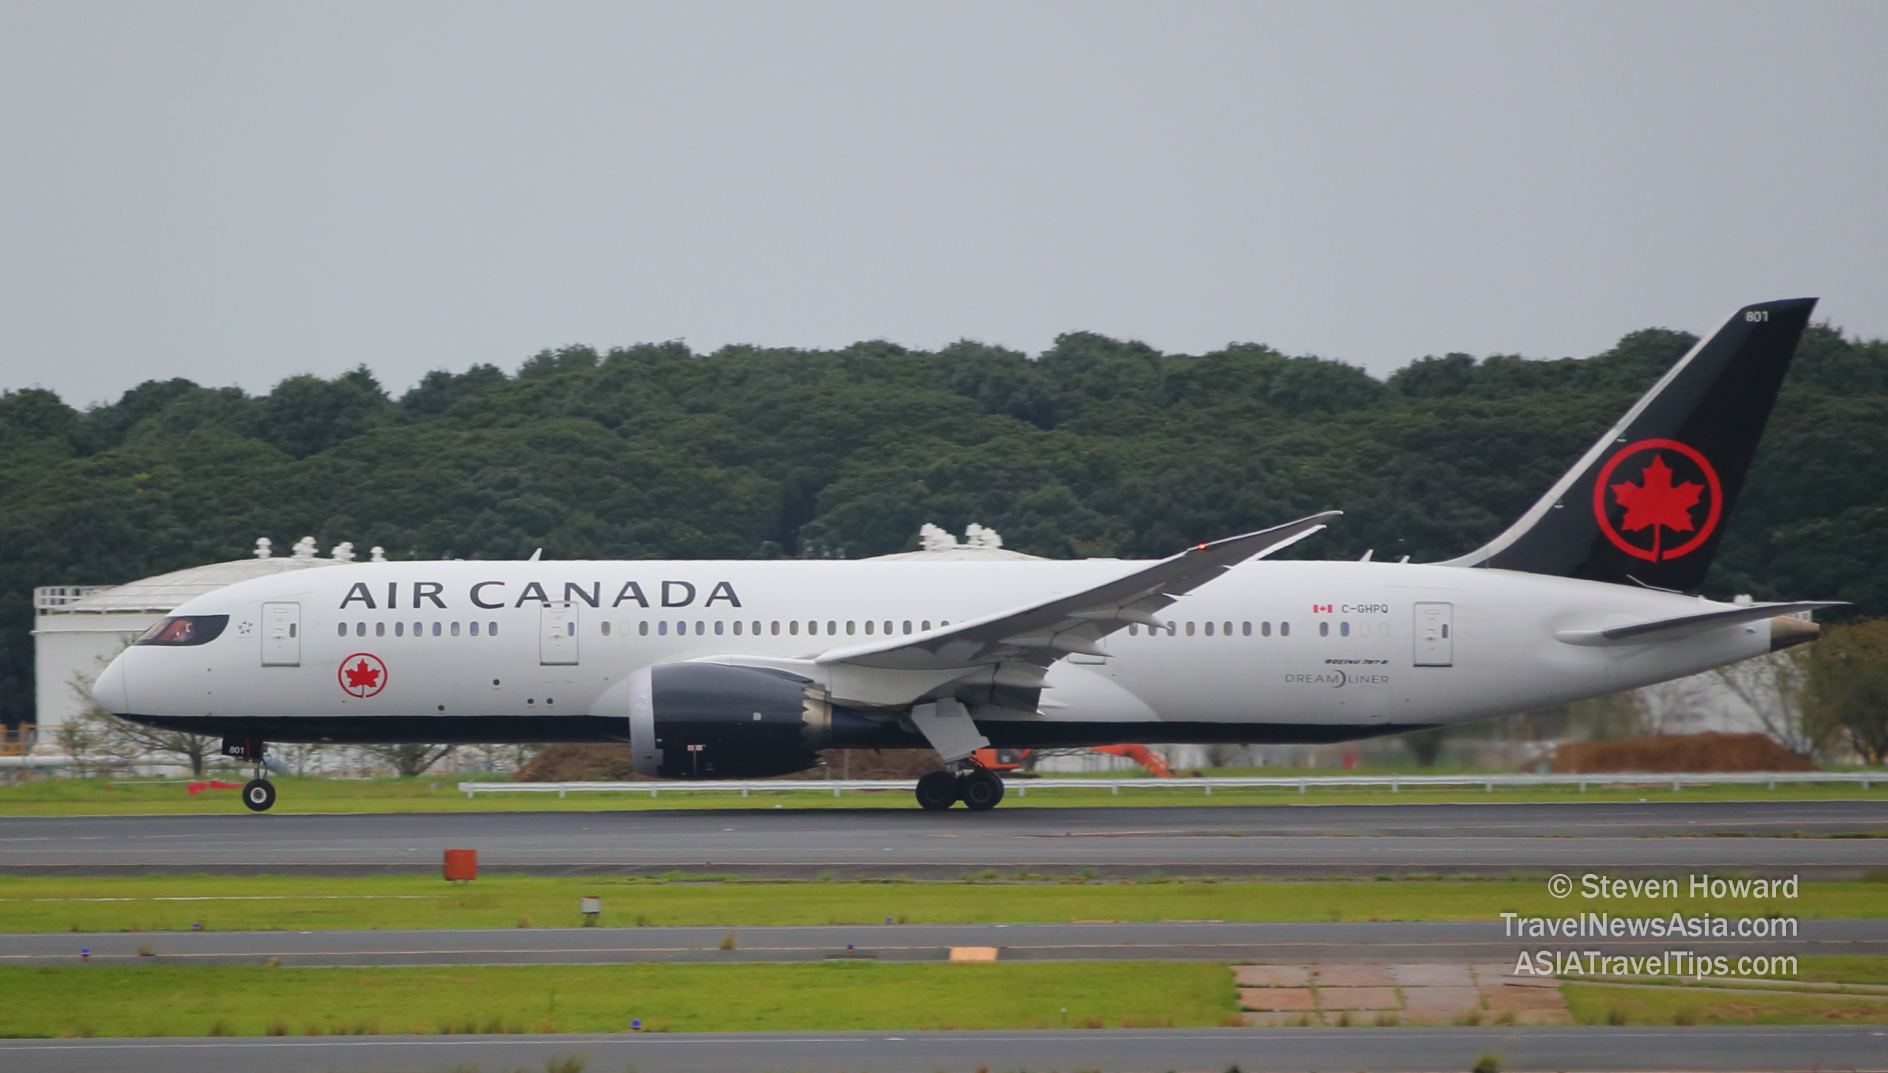 Air Canada Boeing 787-8. Picture by Steven Howard of TravelNewsAsia.com Click to enlarge.